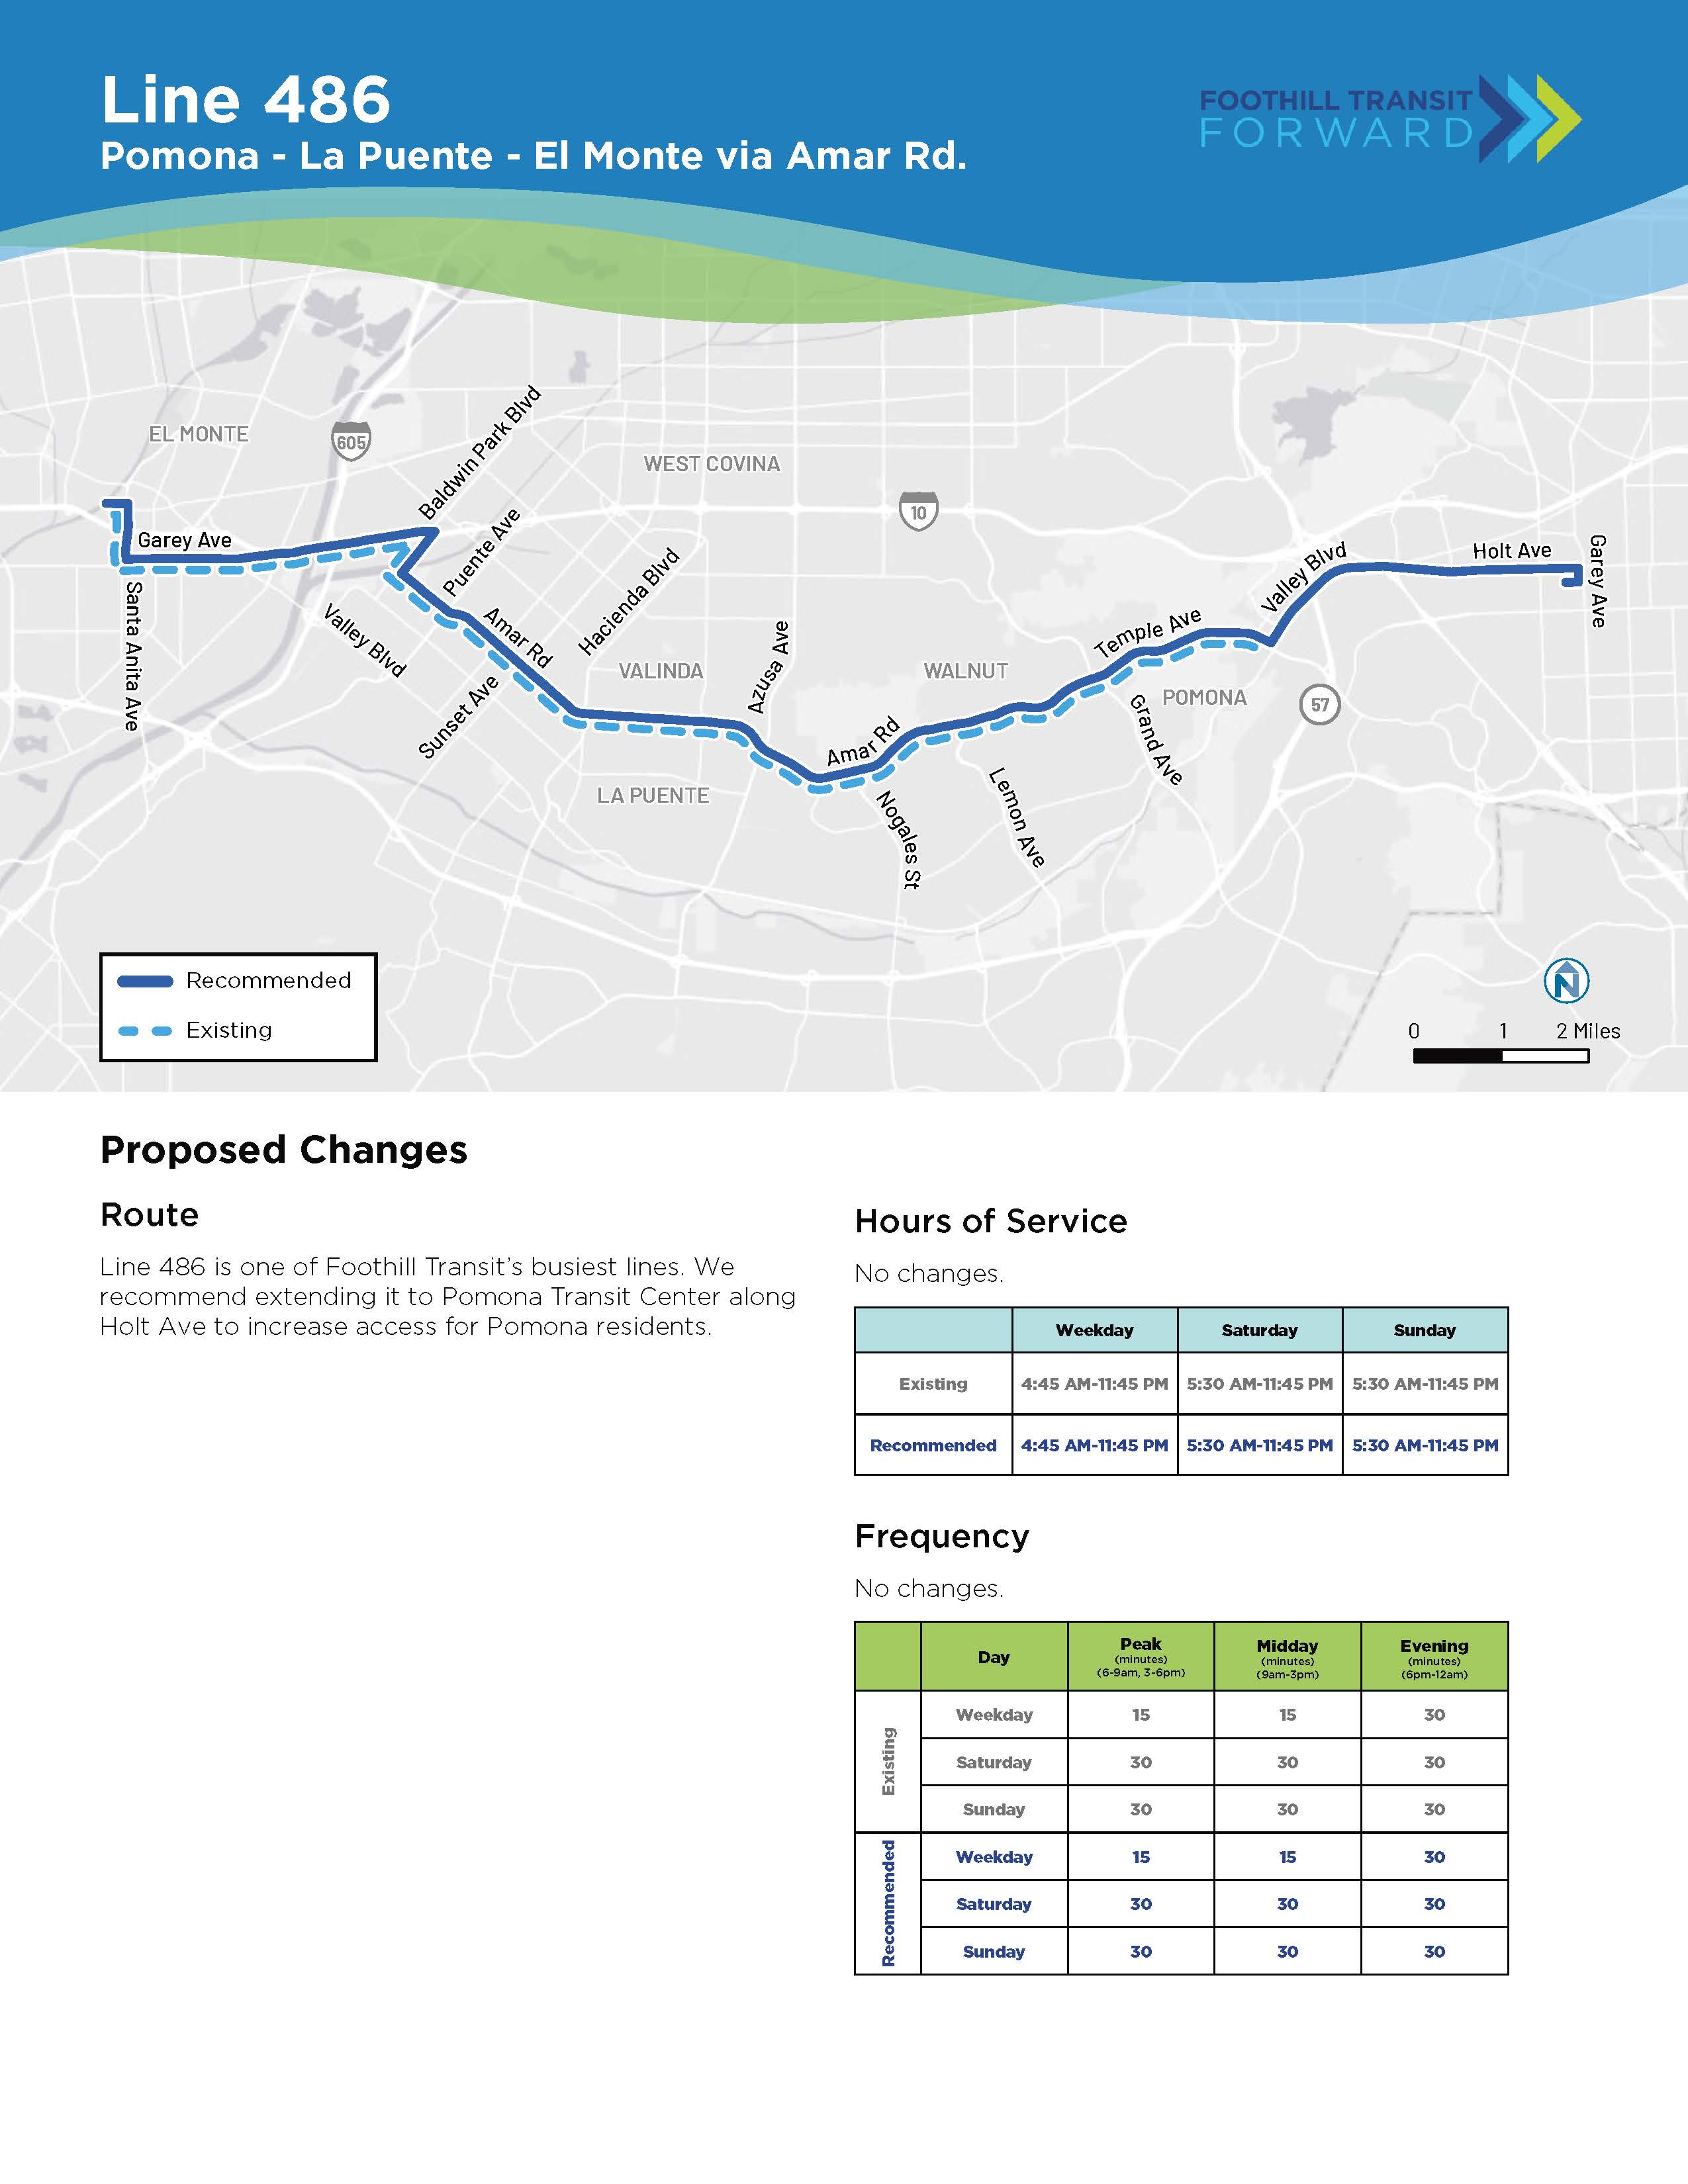 Proposed Changes: Route: Line 486 is one of Foothill Transit’s busiest lines. We recommend extending it to Pomona Transit Center along Holt Ave to increase access for Pomona residents. Hours of Service: No changes. Frequency: No changes.